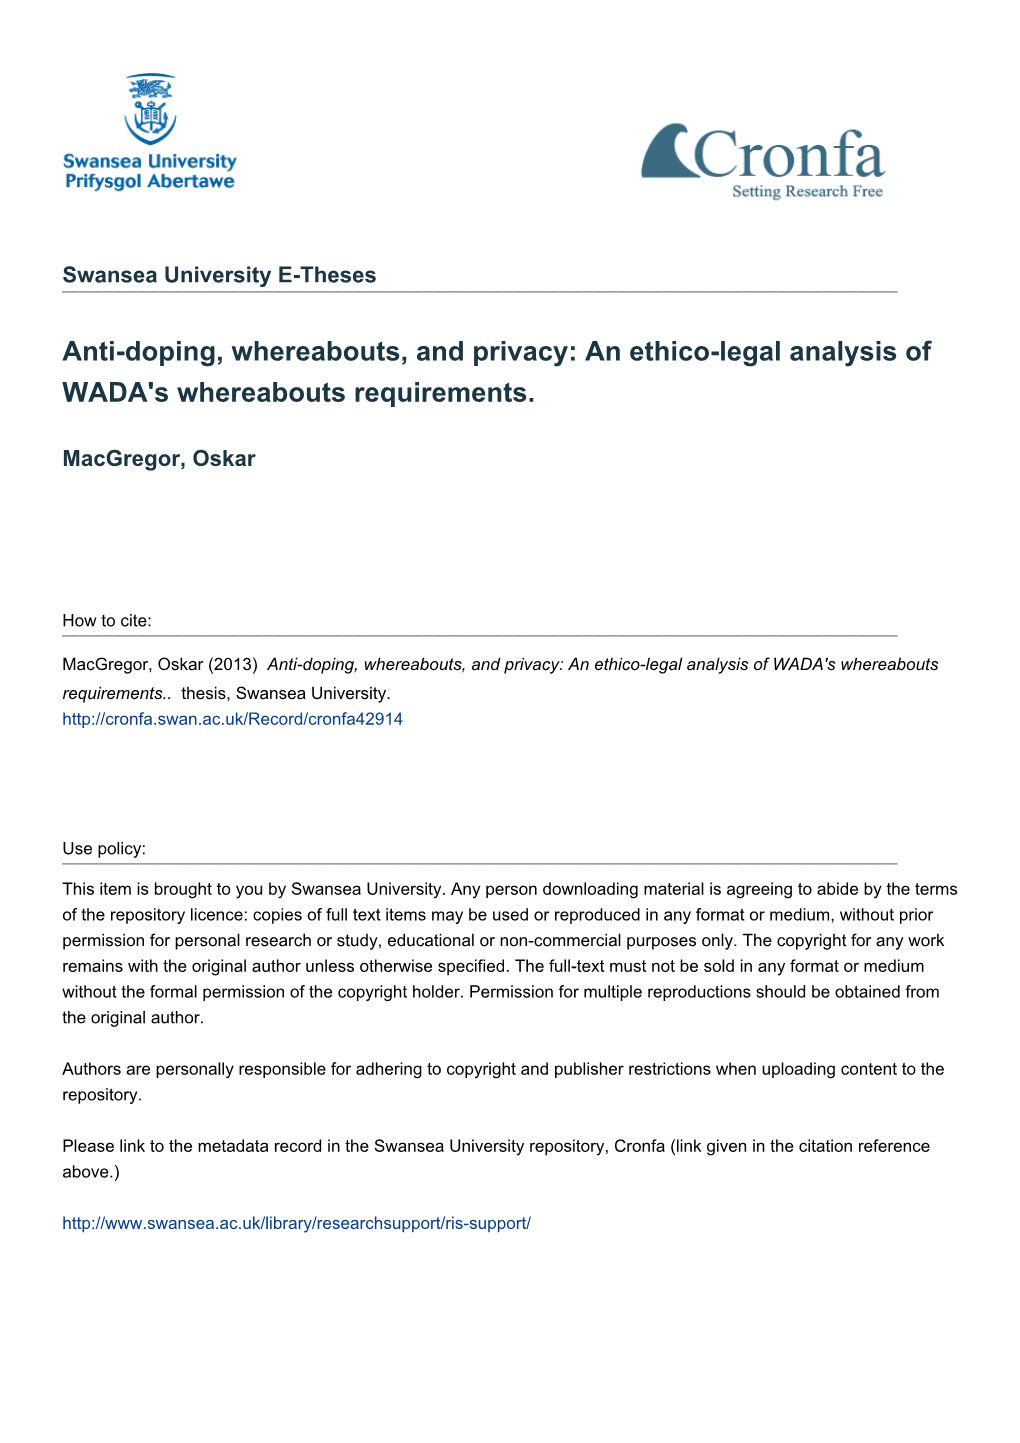 Anti-Doping, Whereabouts, and Privacy: an Ethico-Legal Analysis of WADA's Whereabouts Requirements